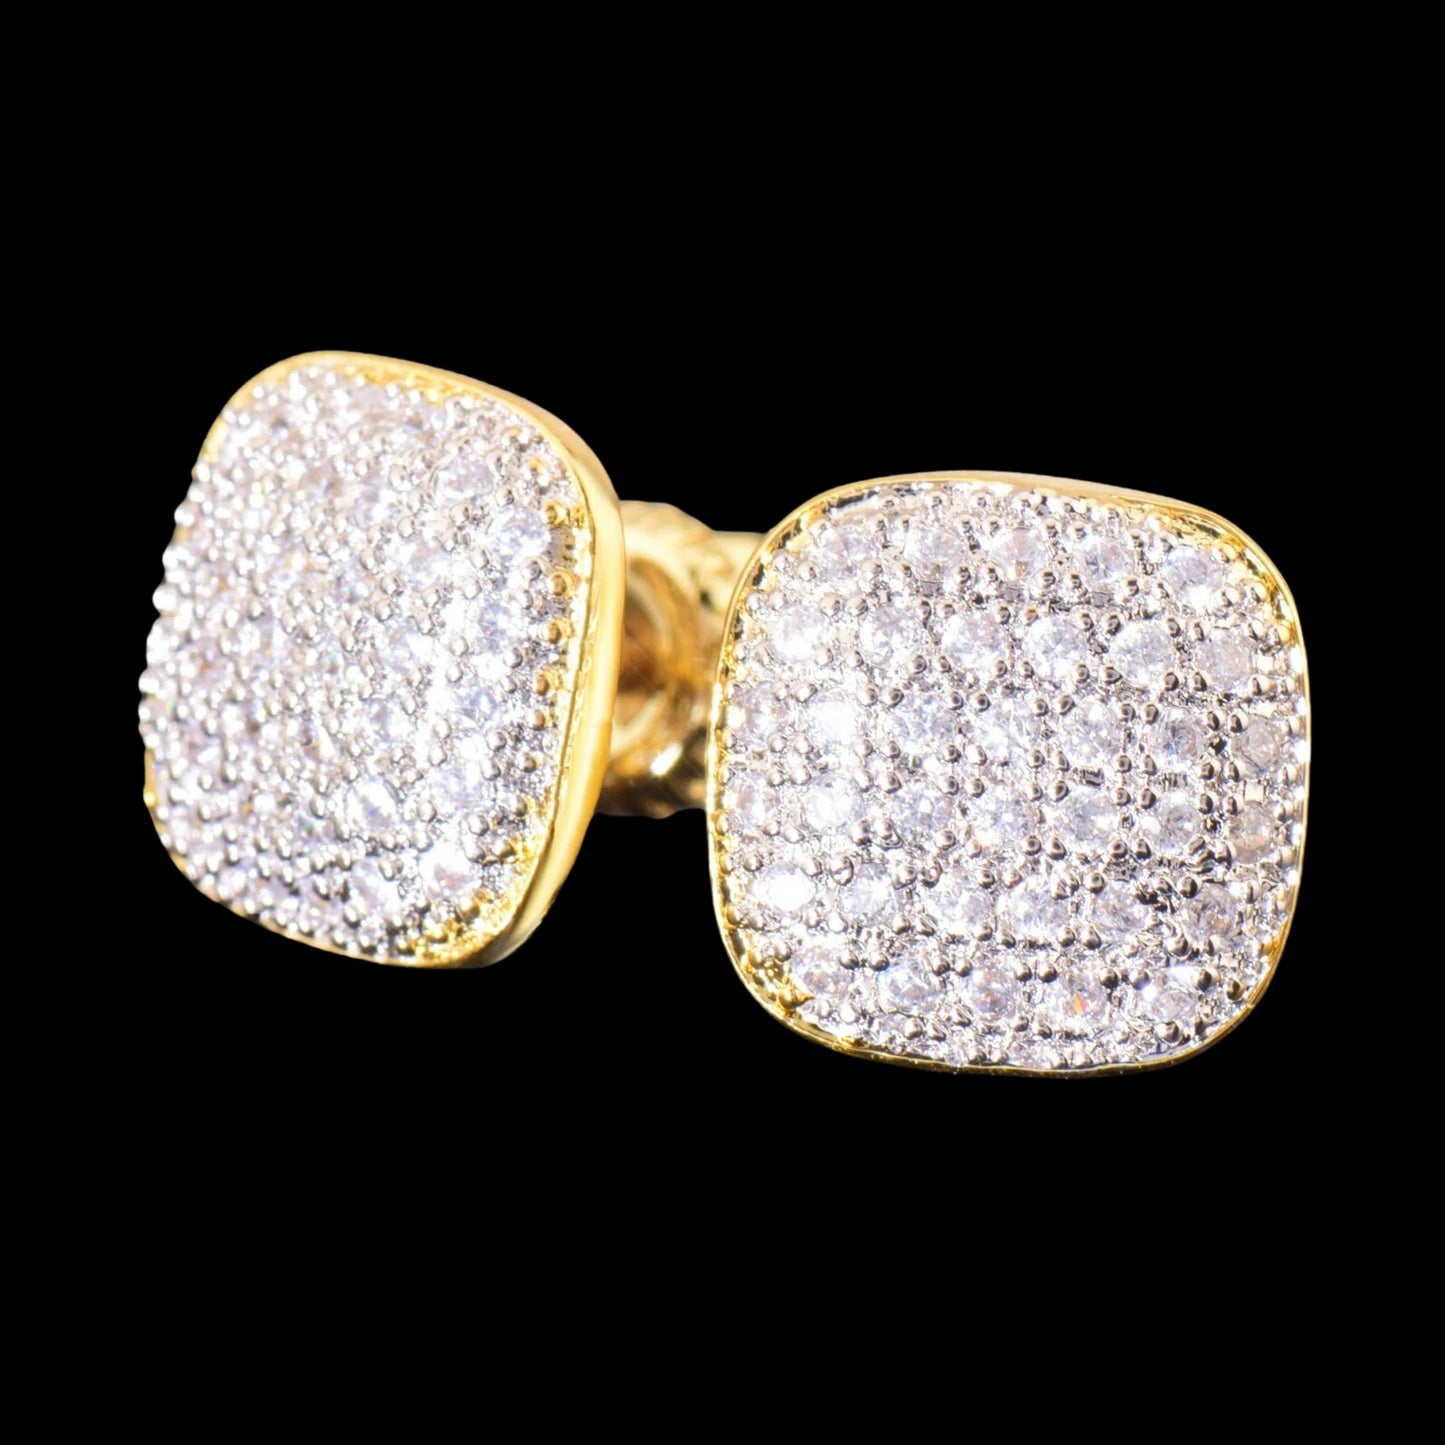 10mm Square Stud Earrings (Gold, Silver, Two-Tone)